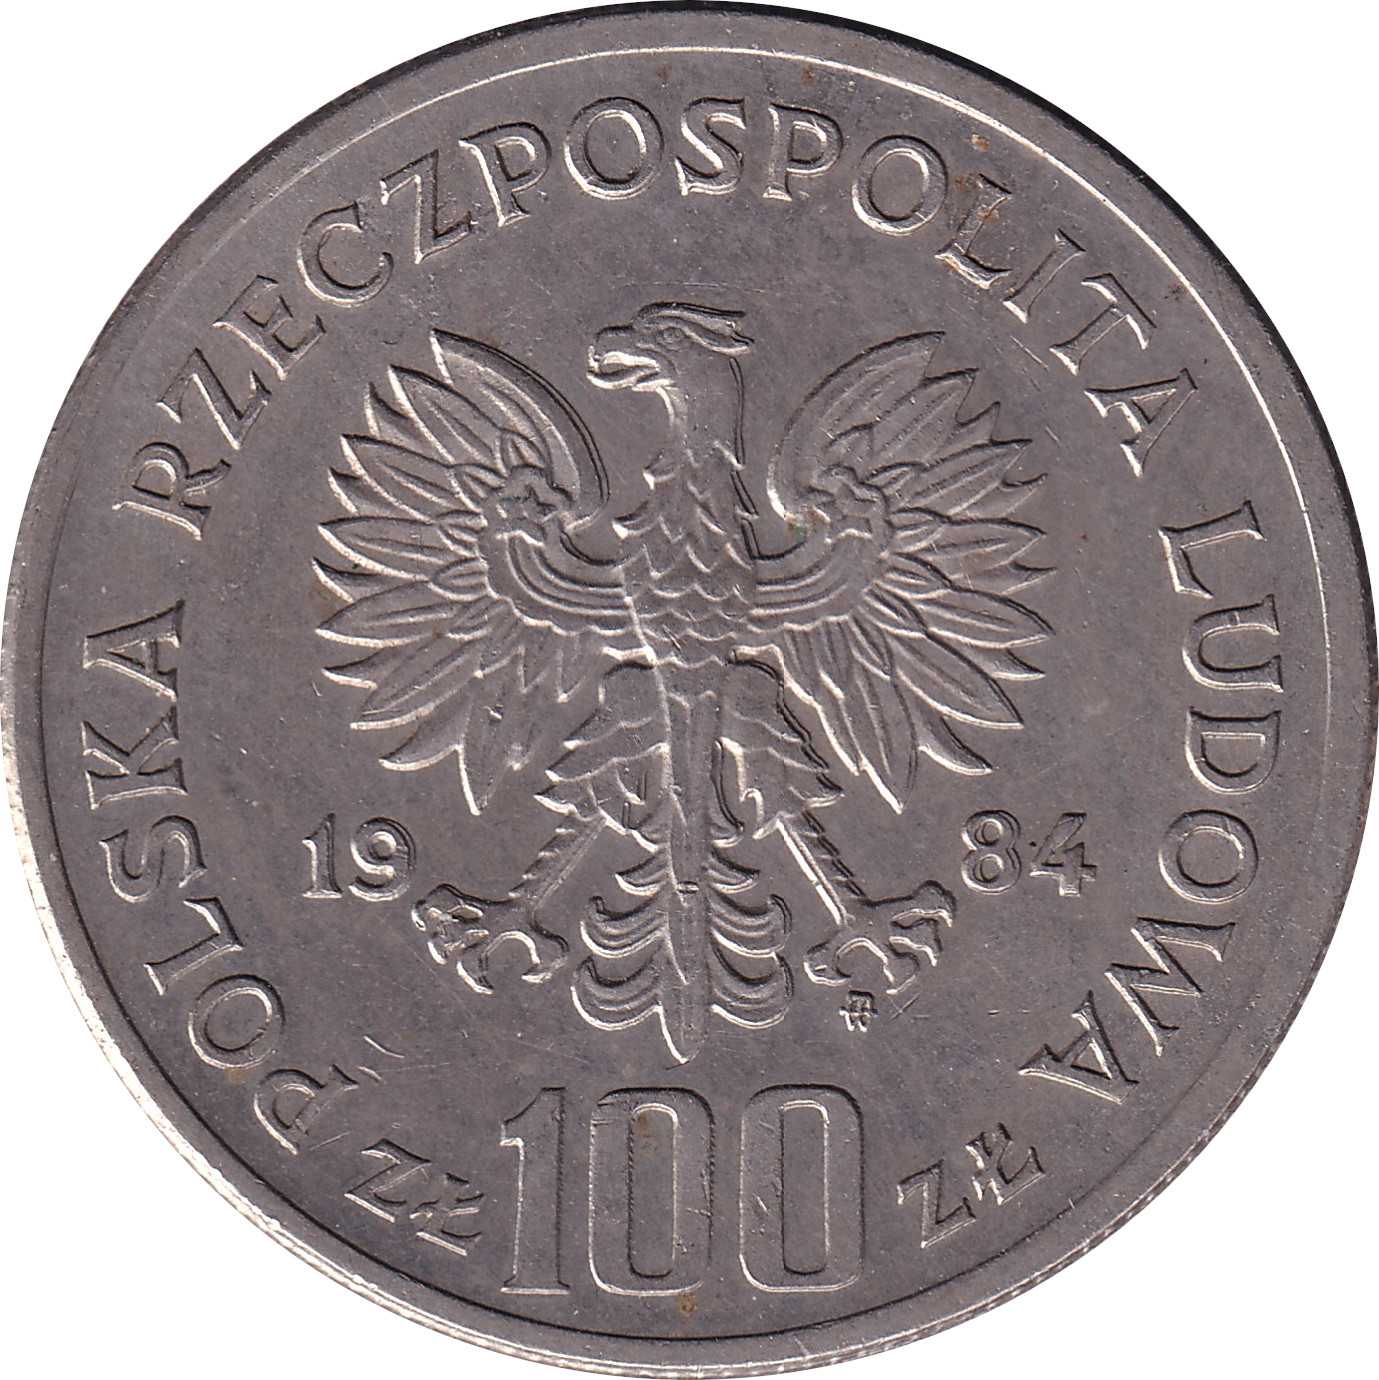 100 zlotych - République - 40 years